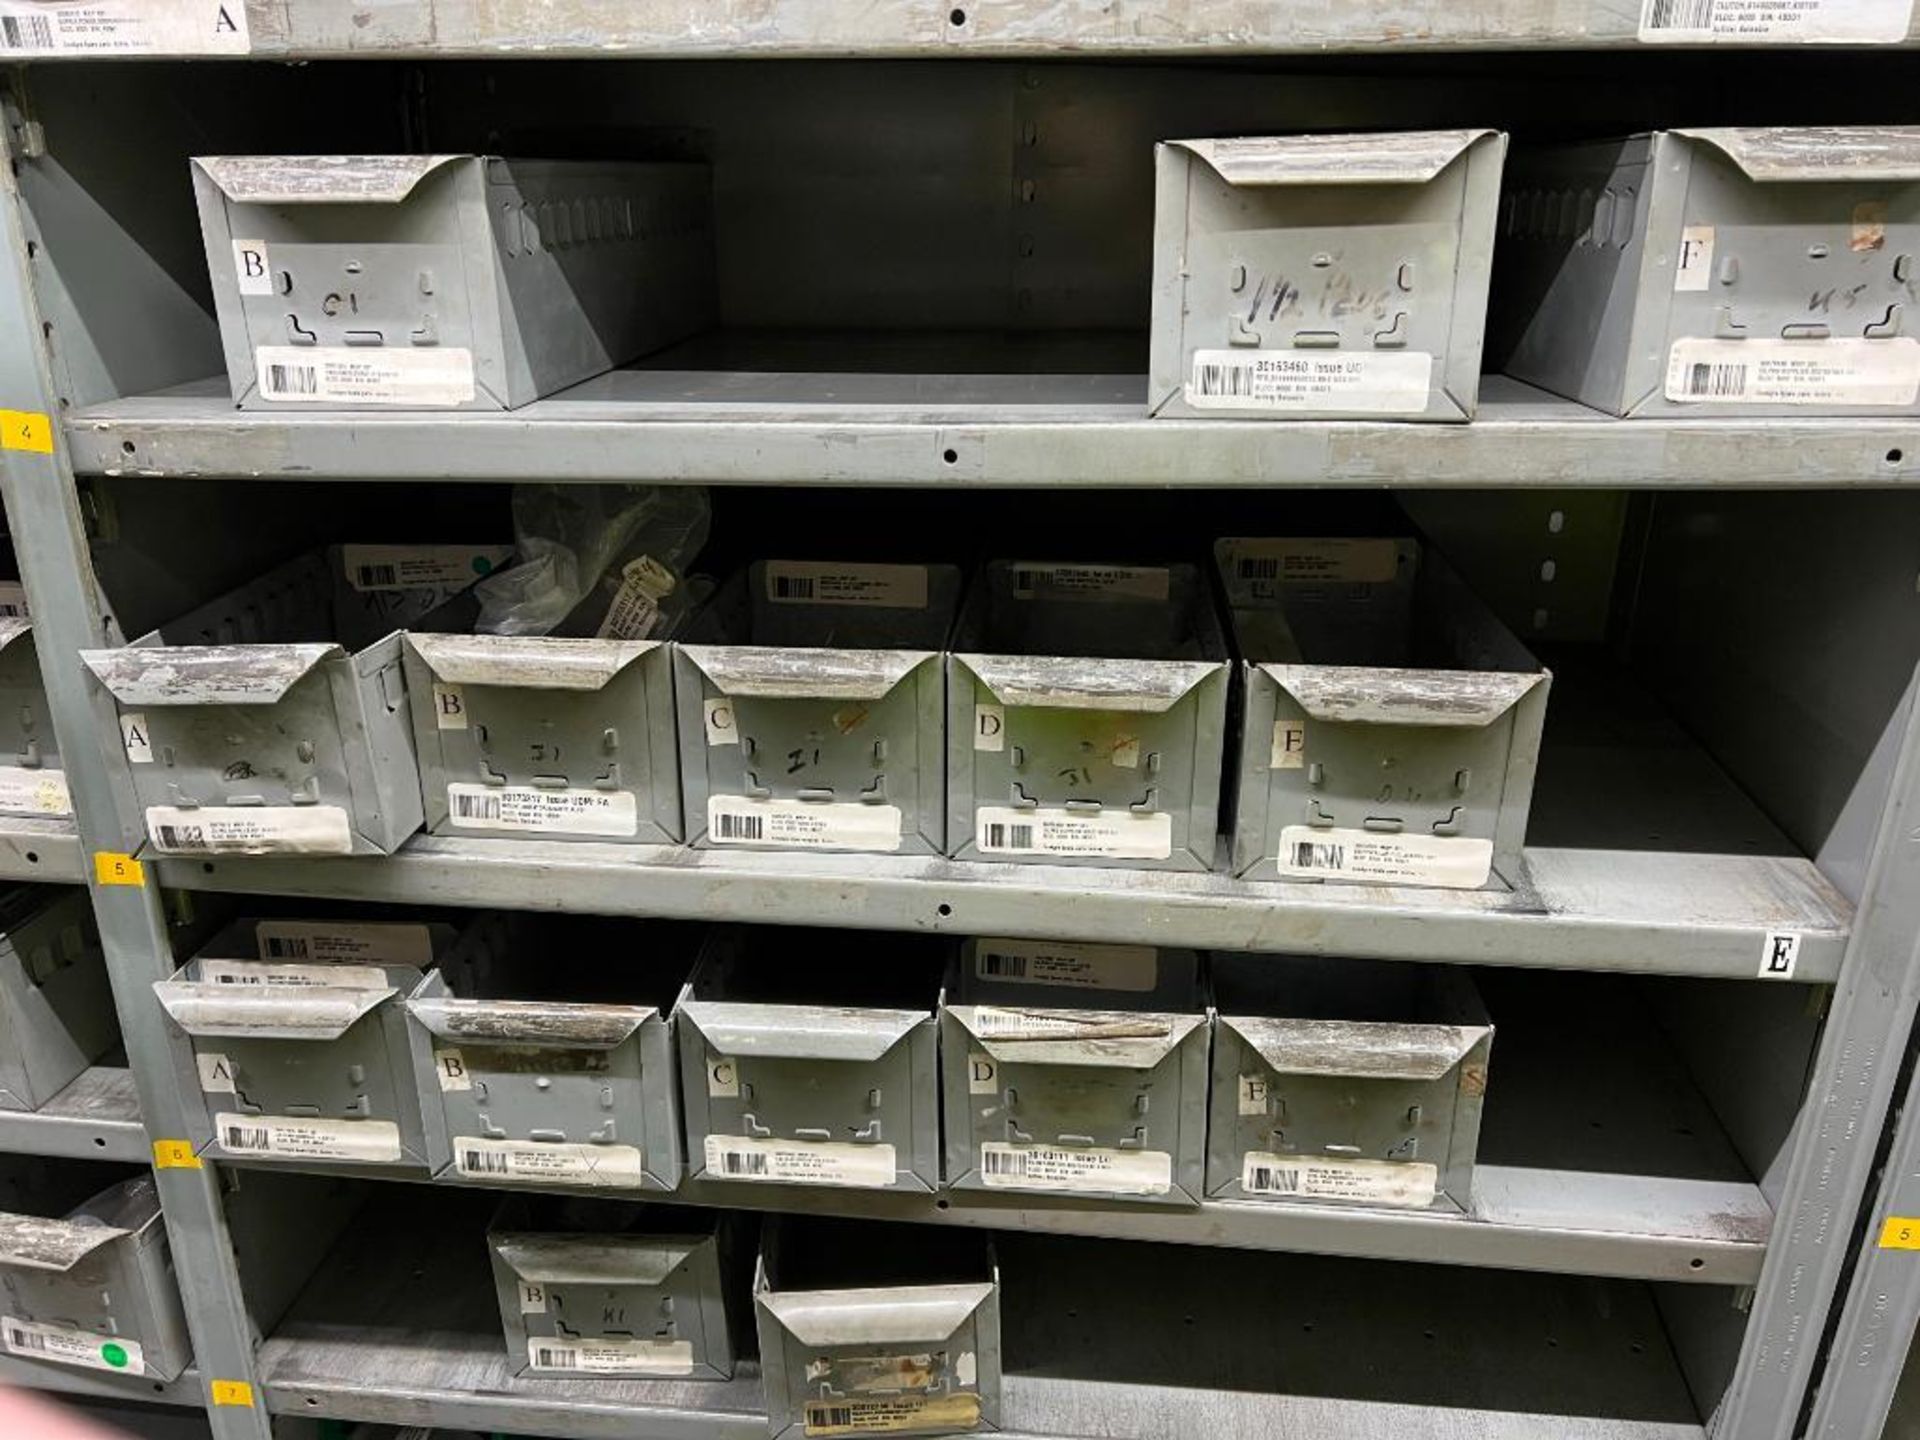 contents of gray shelving units to include, bearings, shafts, filters, fuses, pneumatic scale parts, - Image 92 of 141